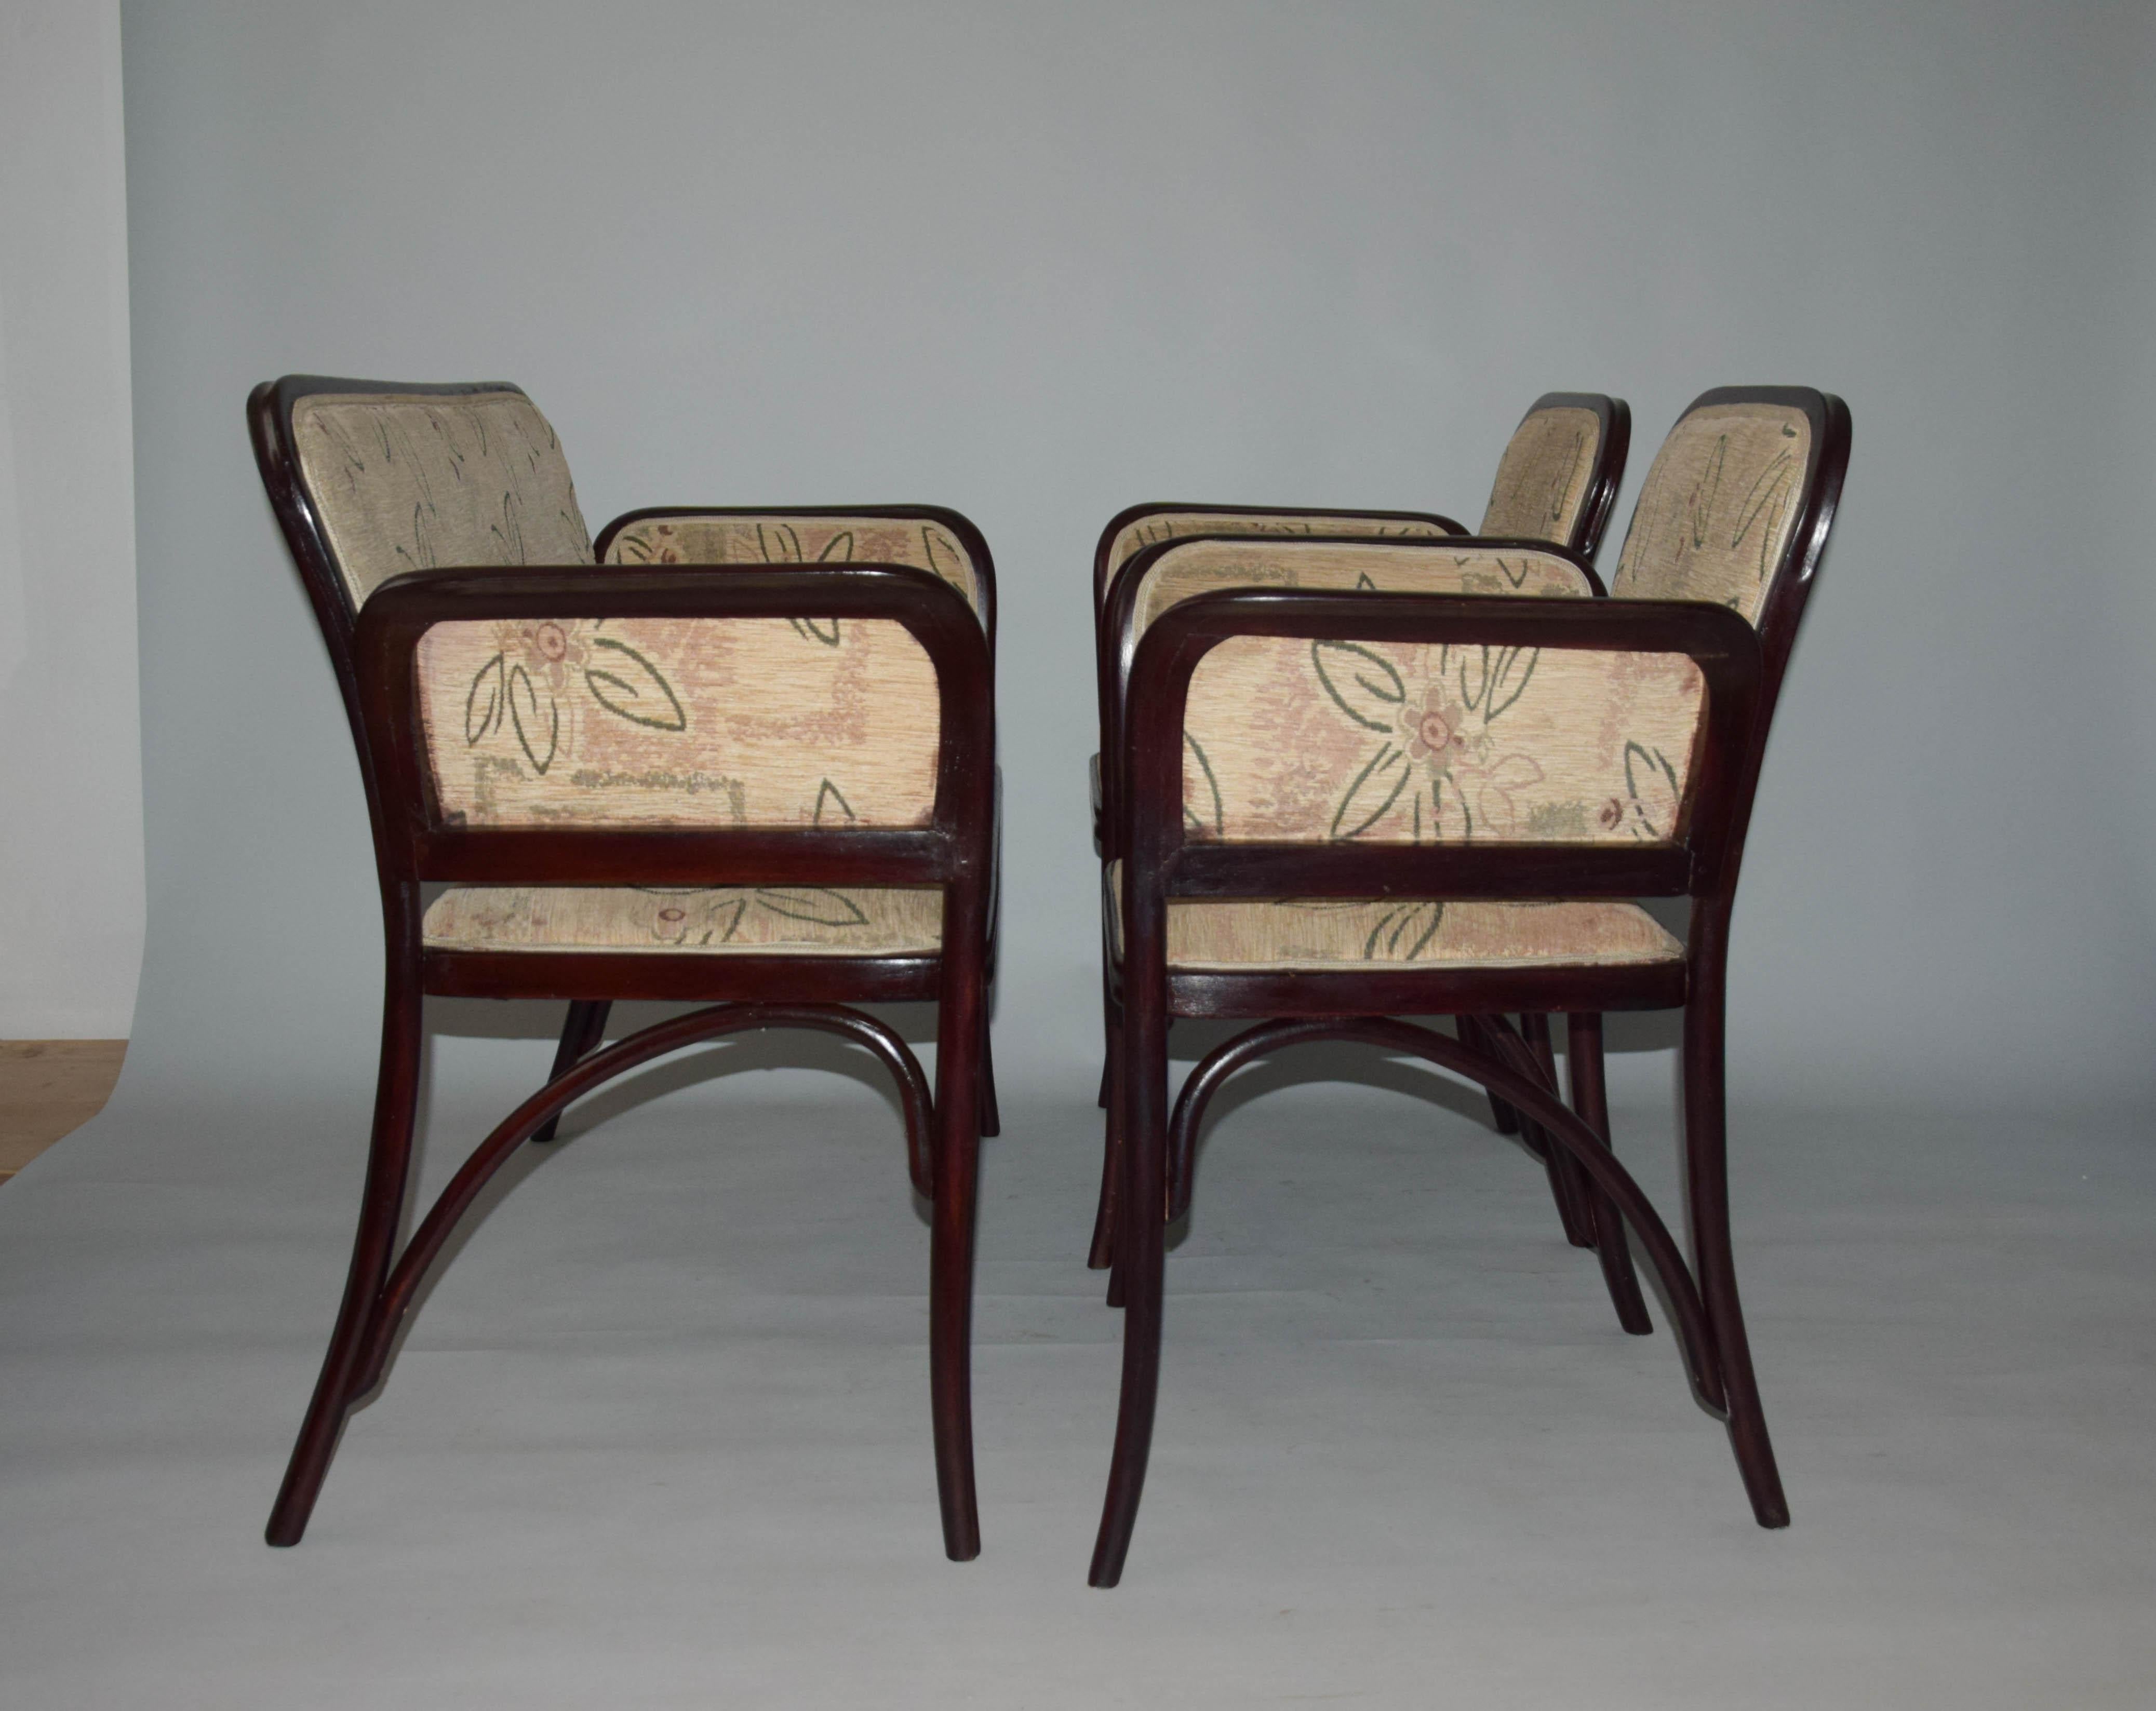 Set of Thonet sofa type 6285 and two armchairs Thonet 6585.
Rare type designed by Otto Wagner.
Recently reupholstered.
Shellac finish.
Dimensions of armchair: H: 90cm, D: 58cm, W: 64cm.